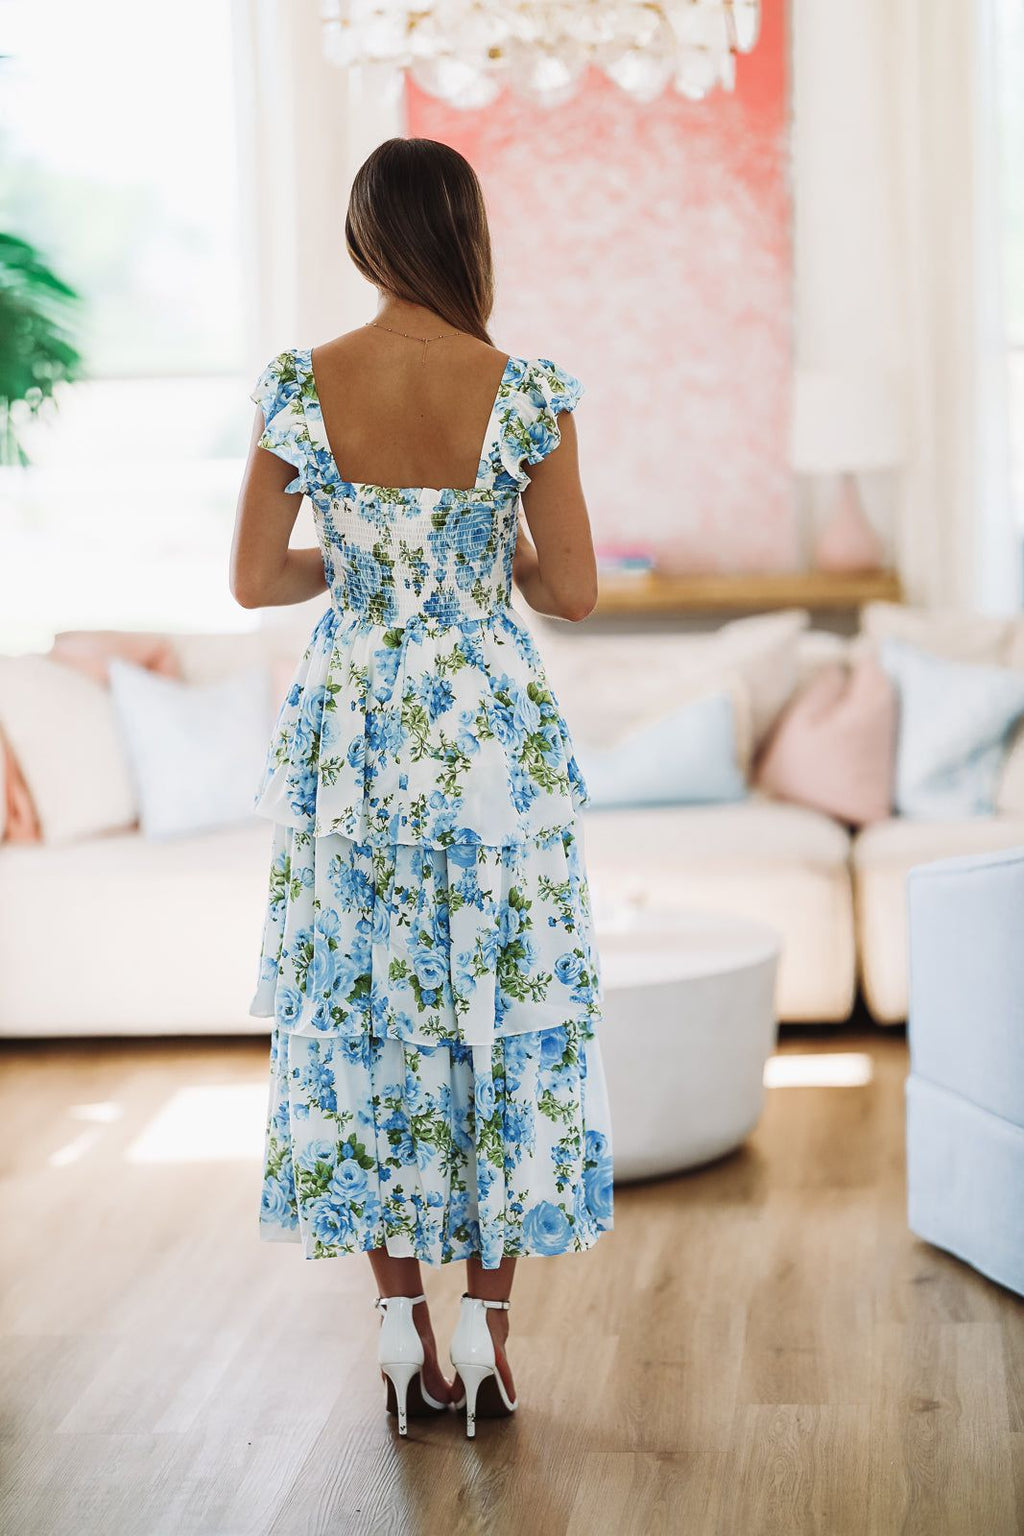 HAZEL & OLIVE In Love With This Midi Dress - Blue